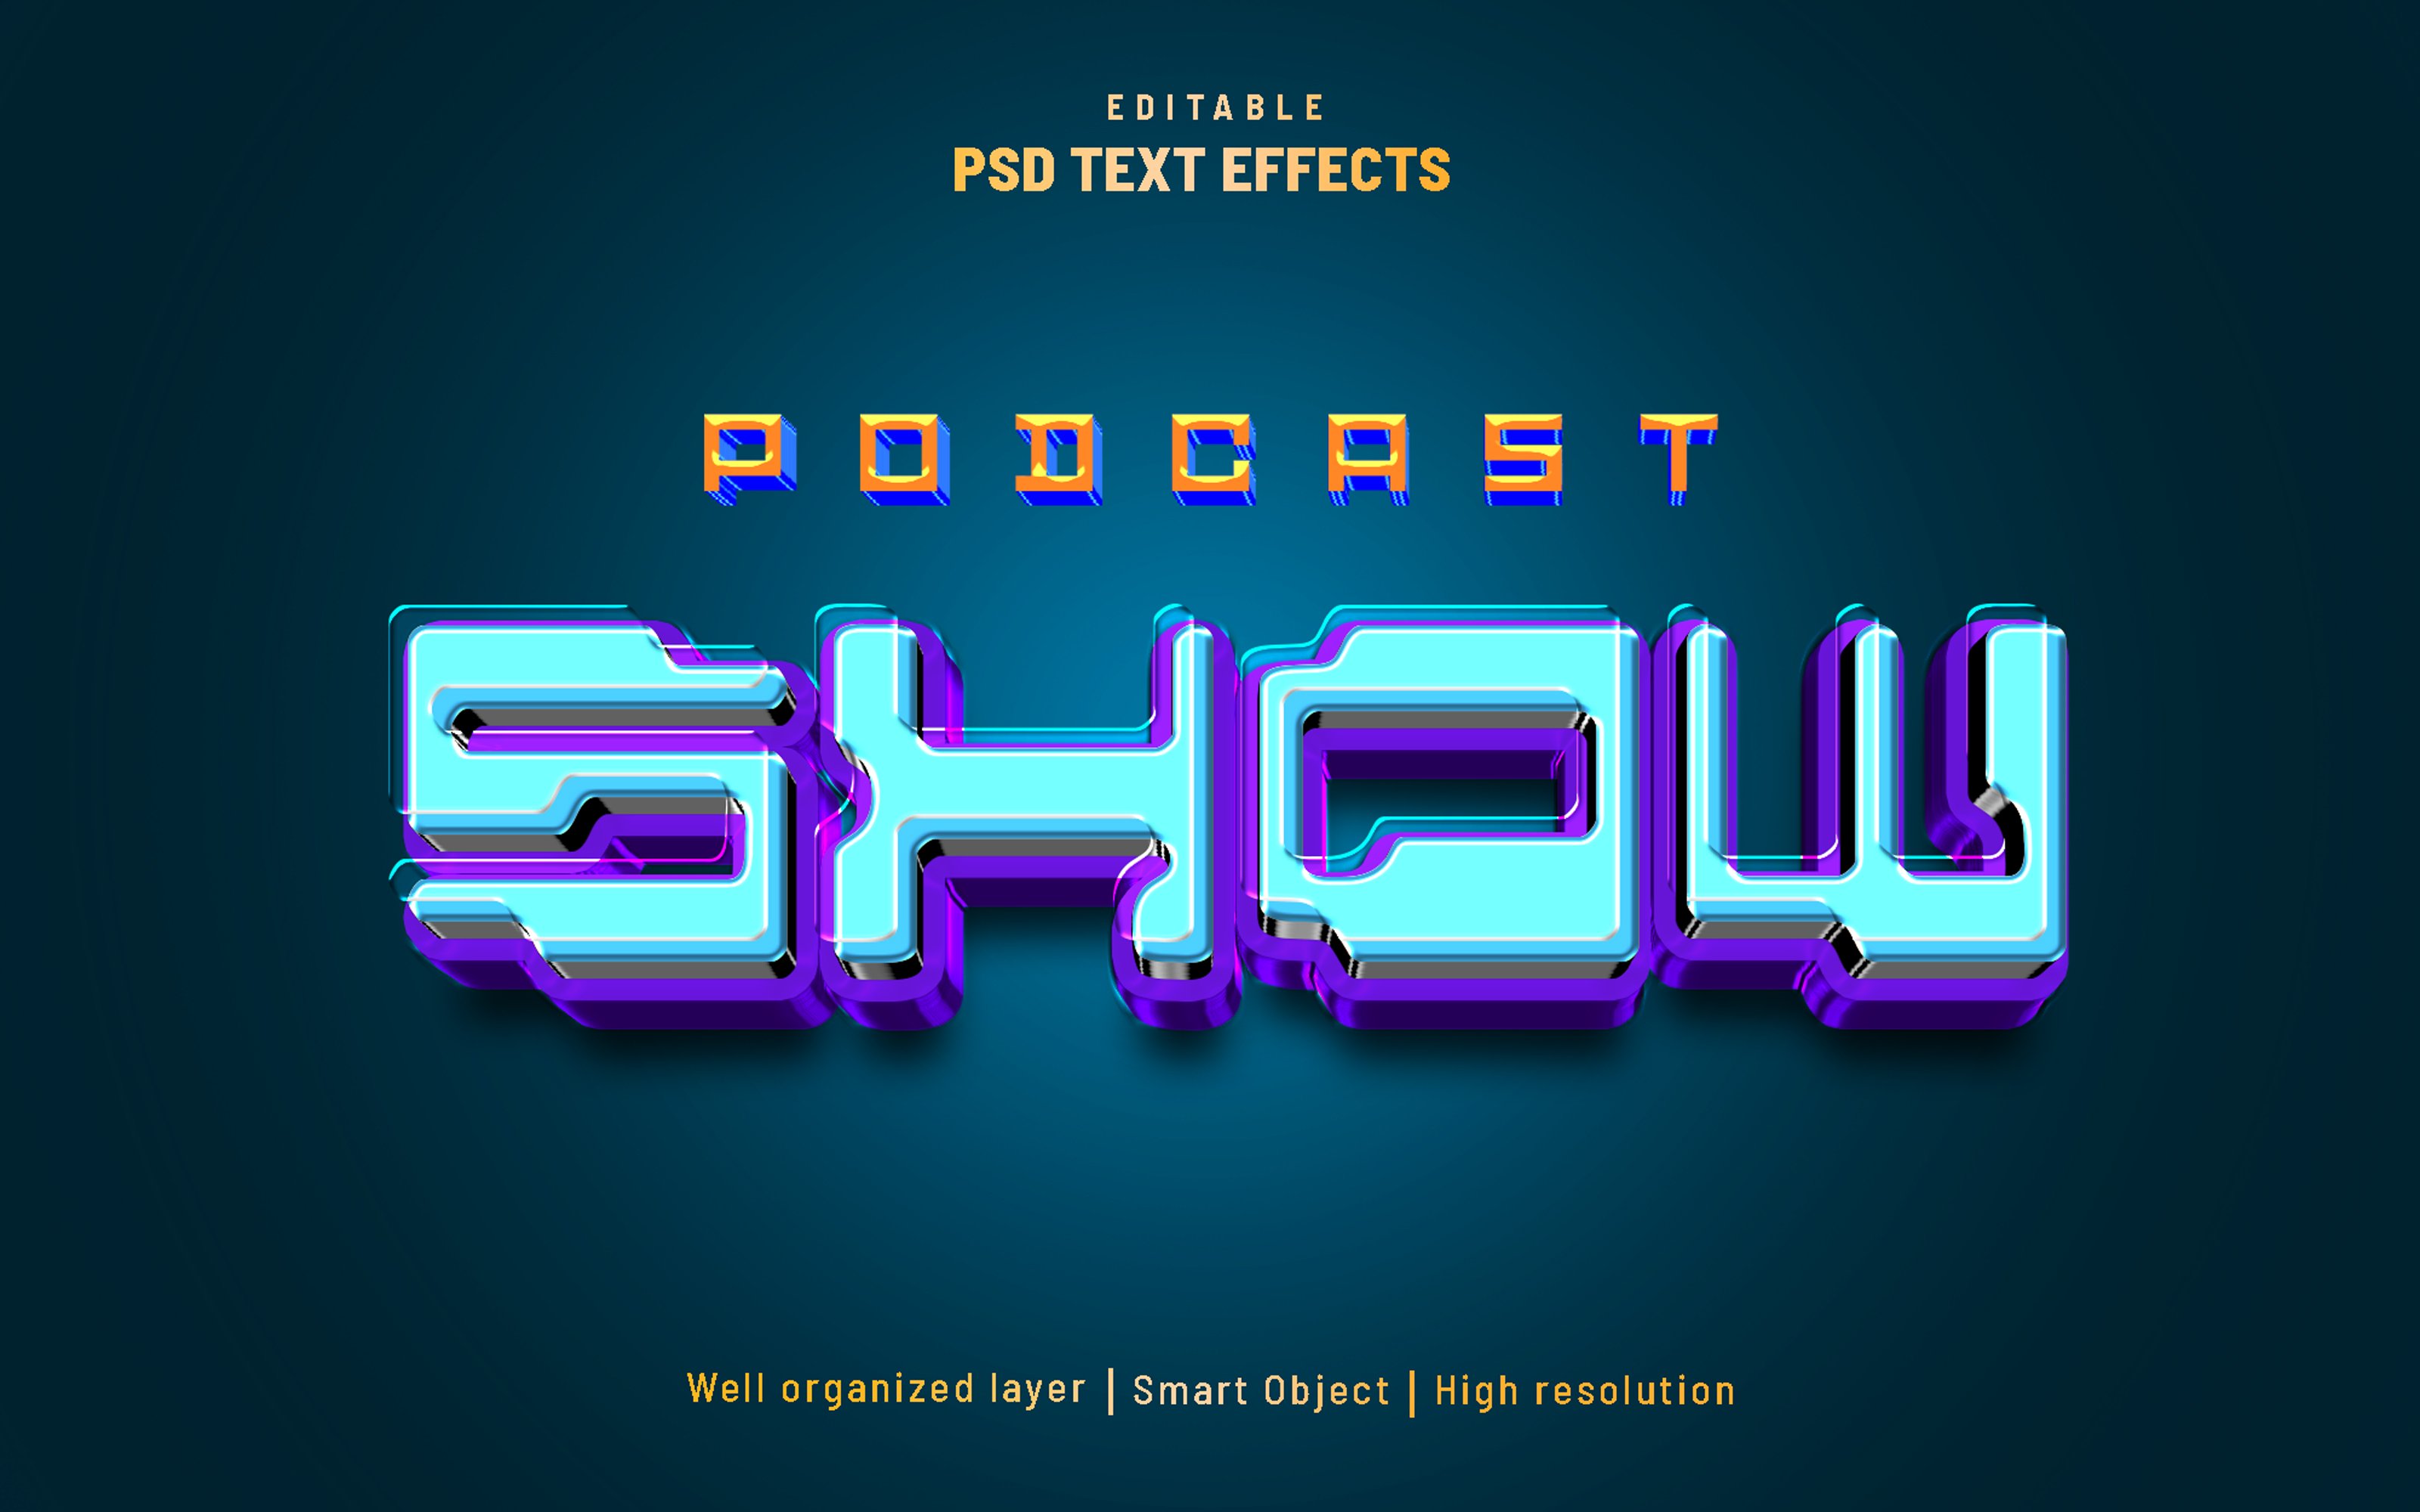 Show editable text effect psdcover image.